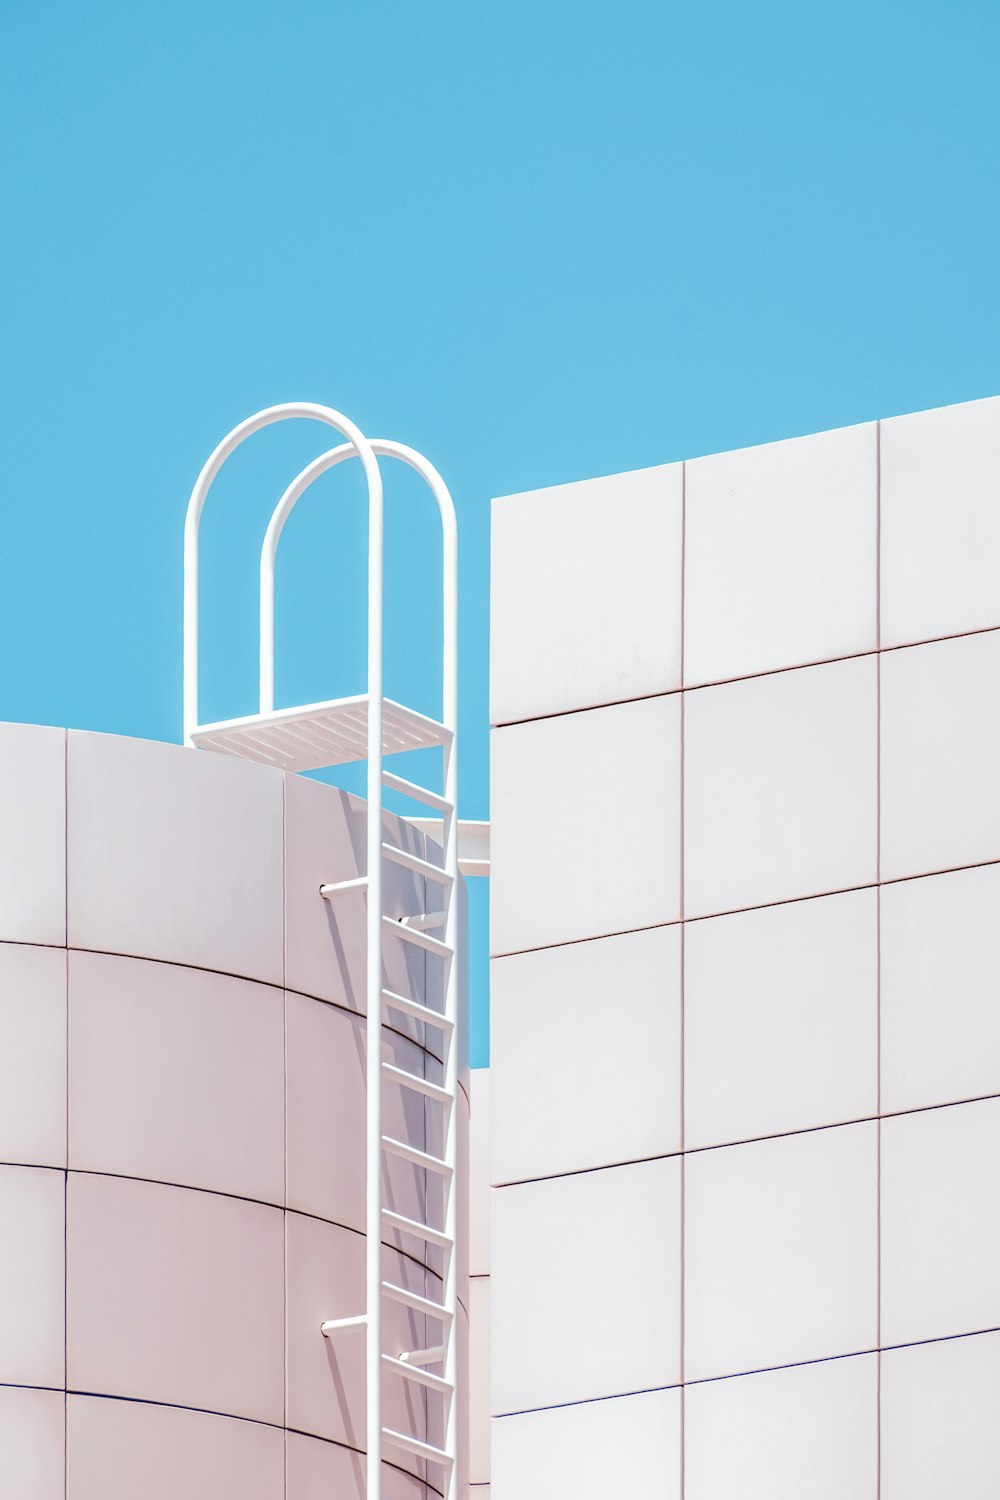 a ladder leaning against a white wall with a blue sky in the background